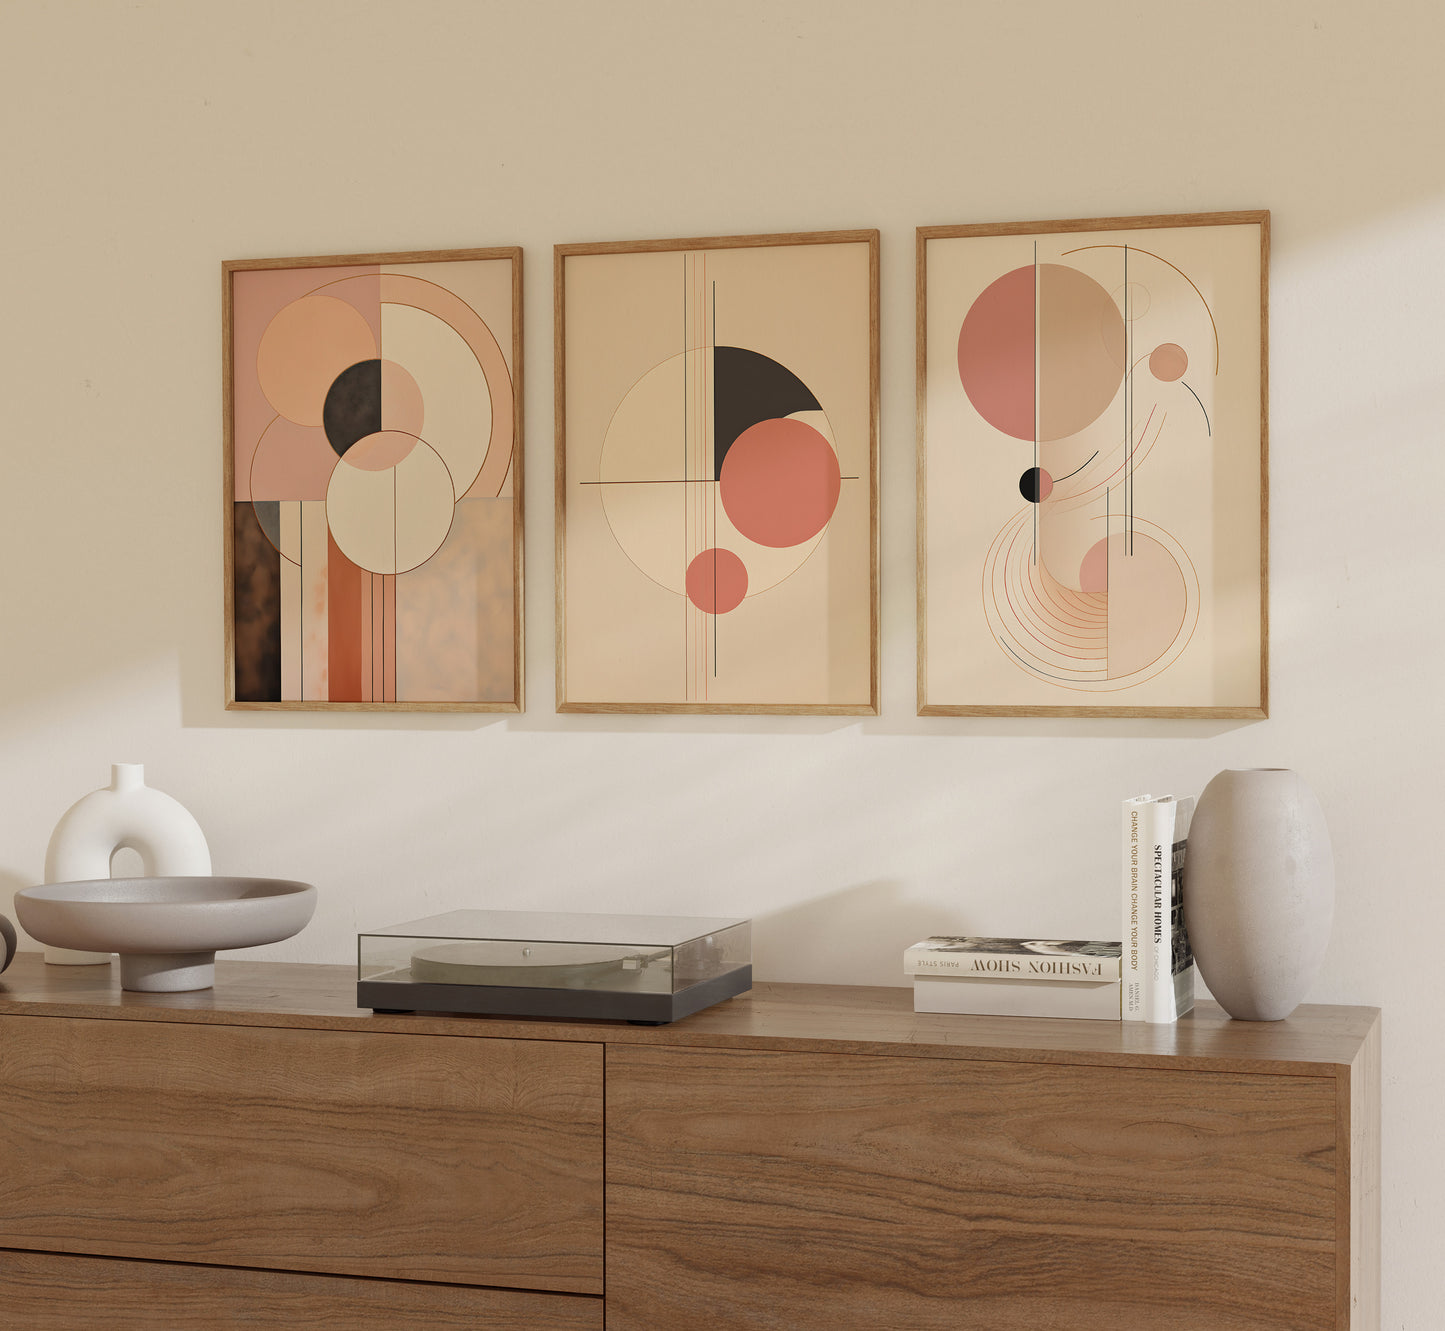 Three abstract art pieces in warm tones hanging on a beige wall above a wooden cabinet.